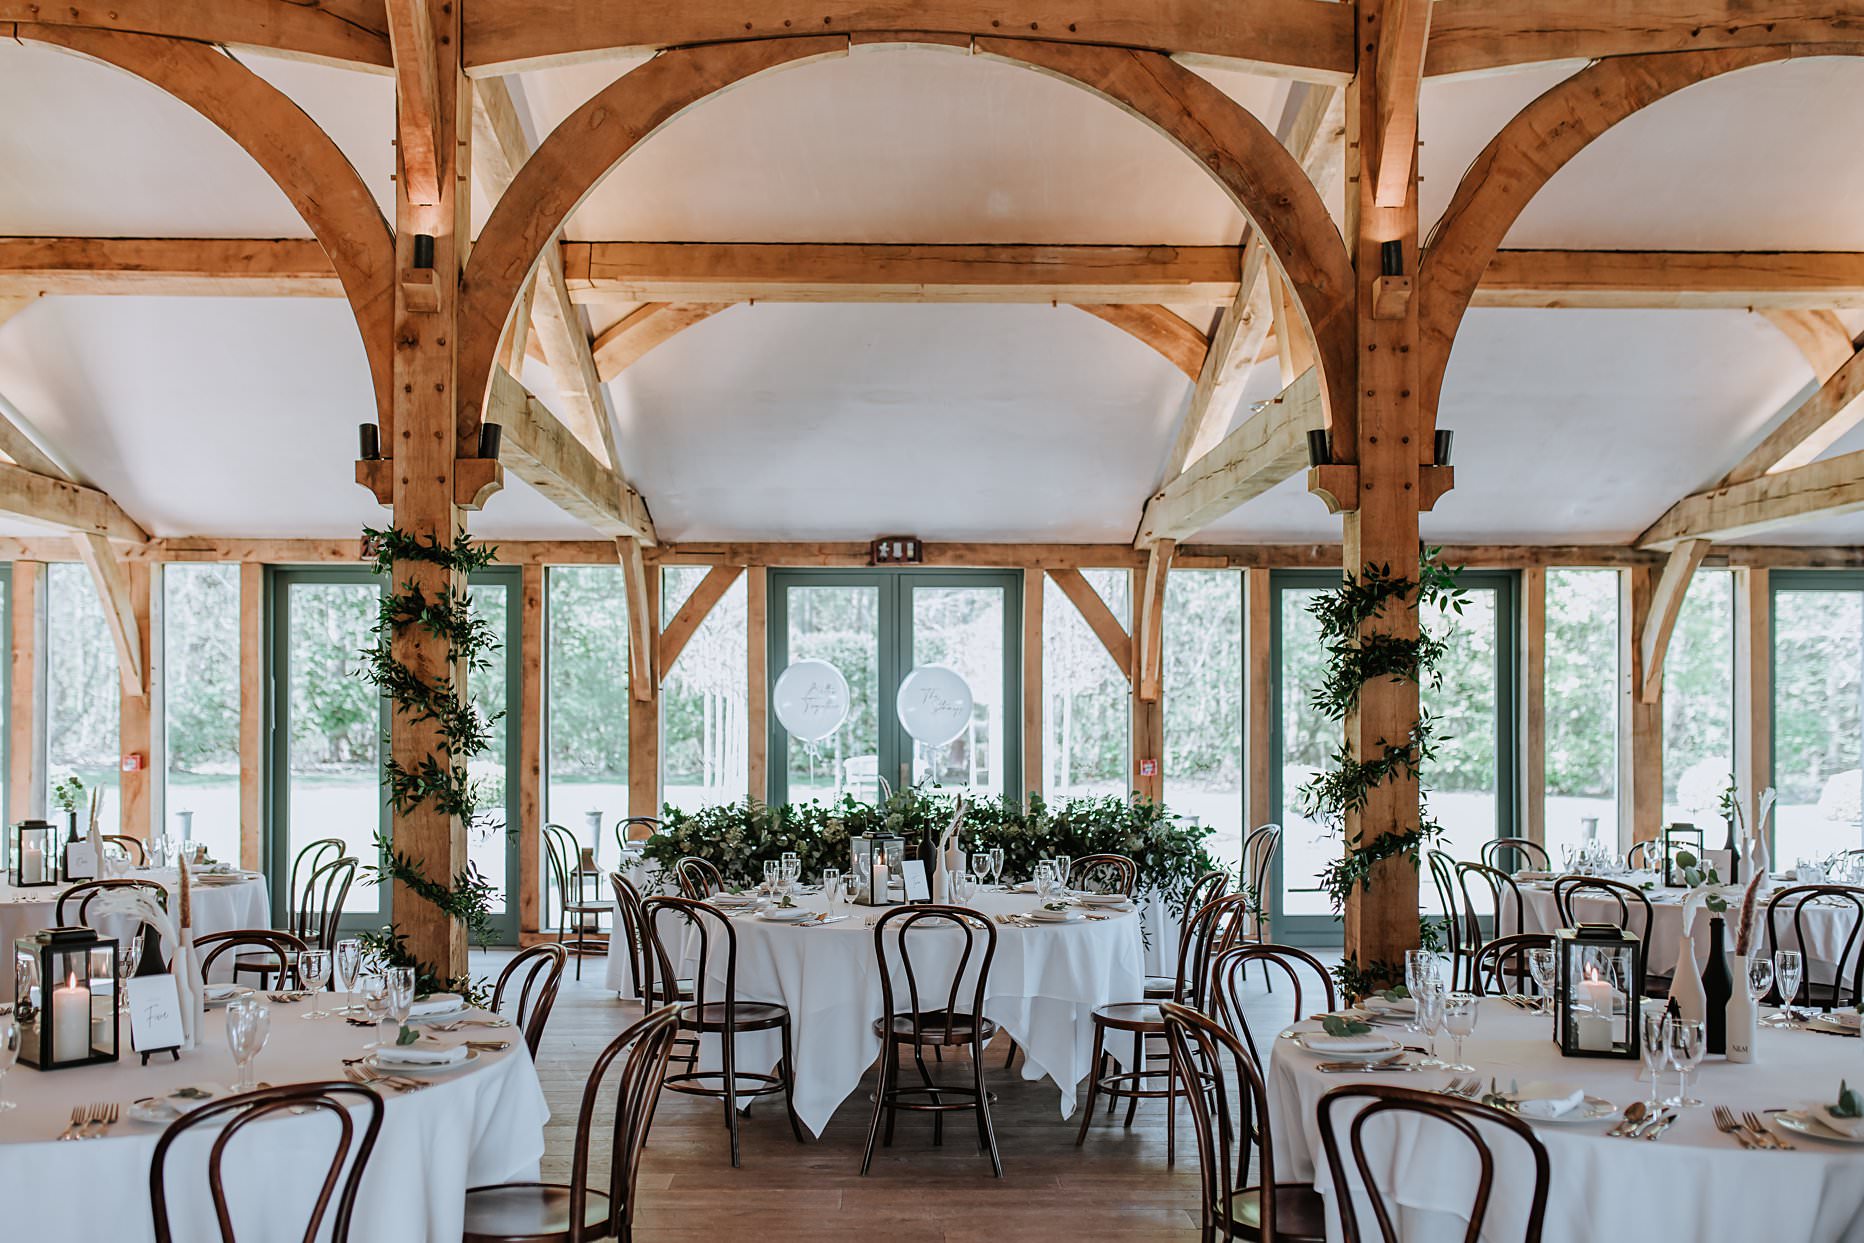 Interior of the wedding breakfast room at Hazel Gap Barn. The room is dressed with white table cloths and green foliage.